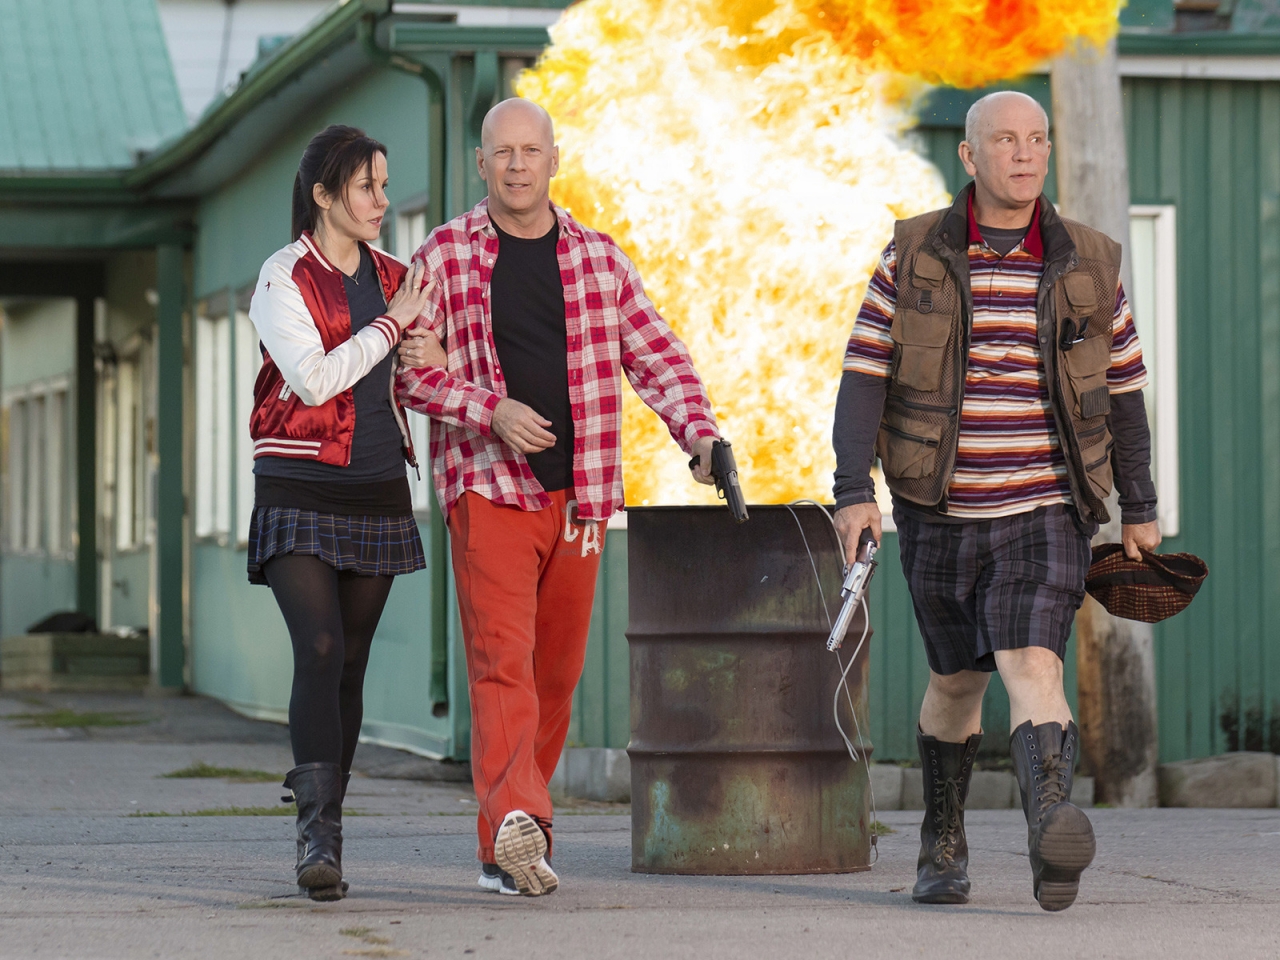 Red 2 Movie 2013 for 1280 x 960 resolution